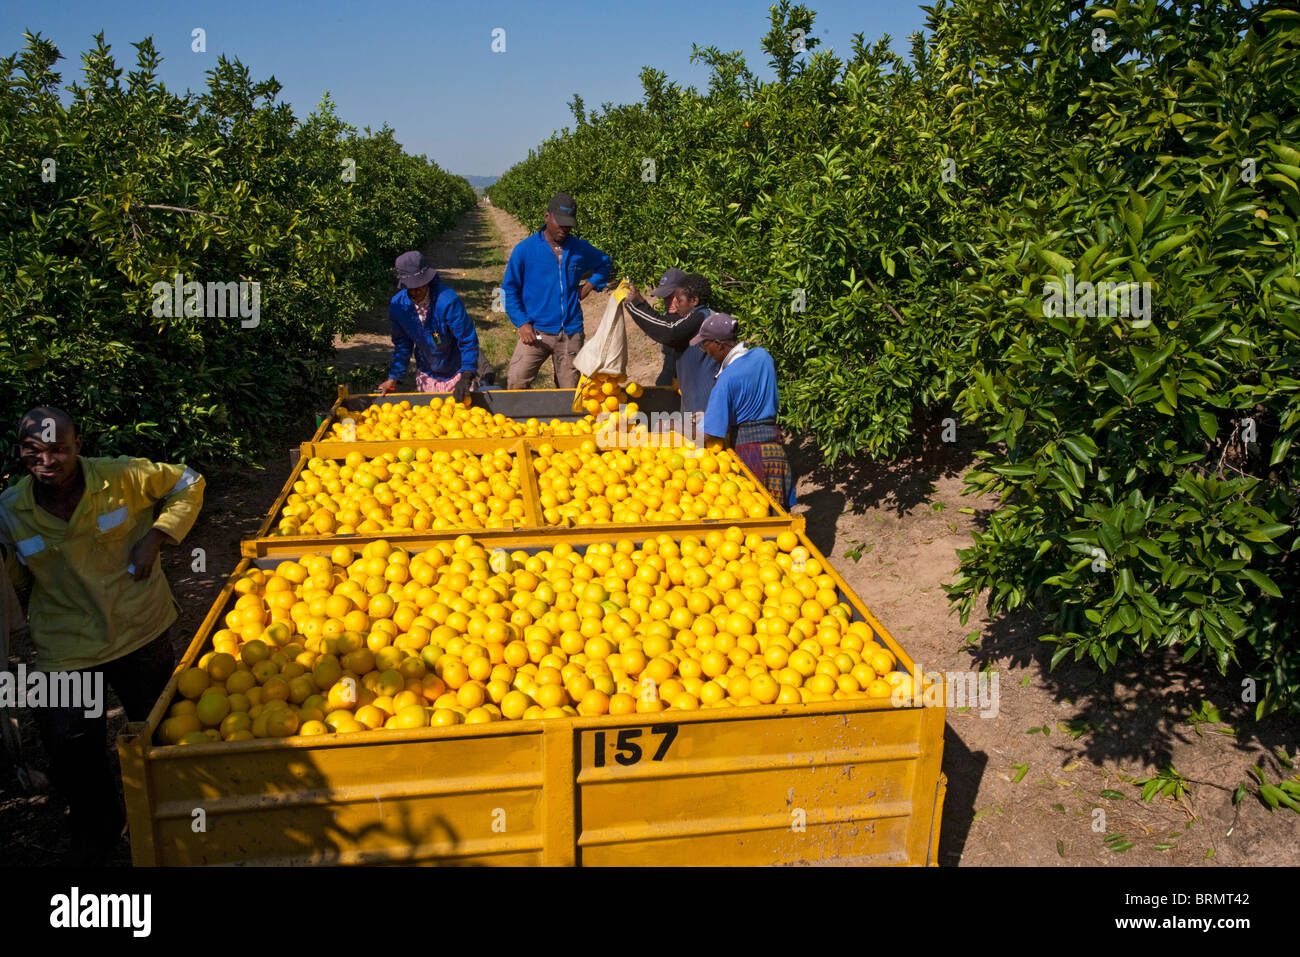 Workers loading freshly harvested oranges onto a trailer in an orchard Stock Photo